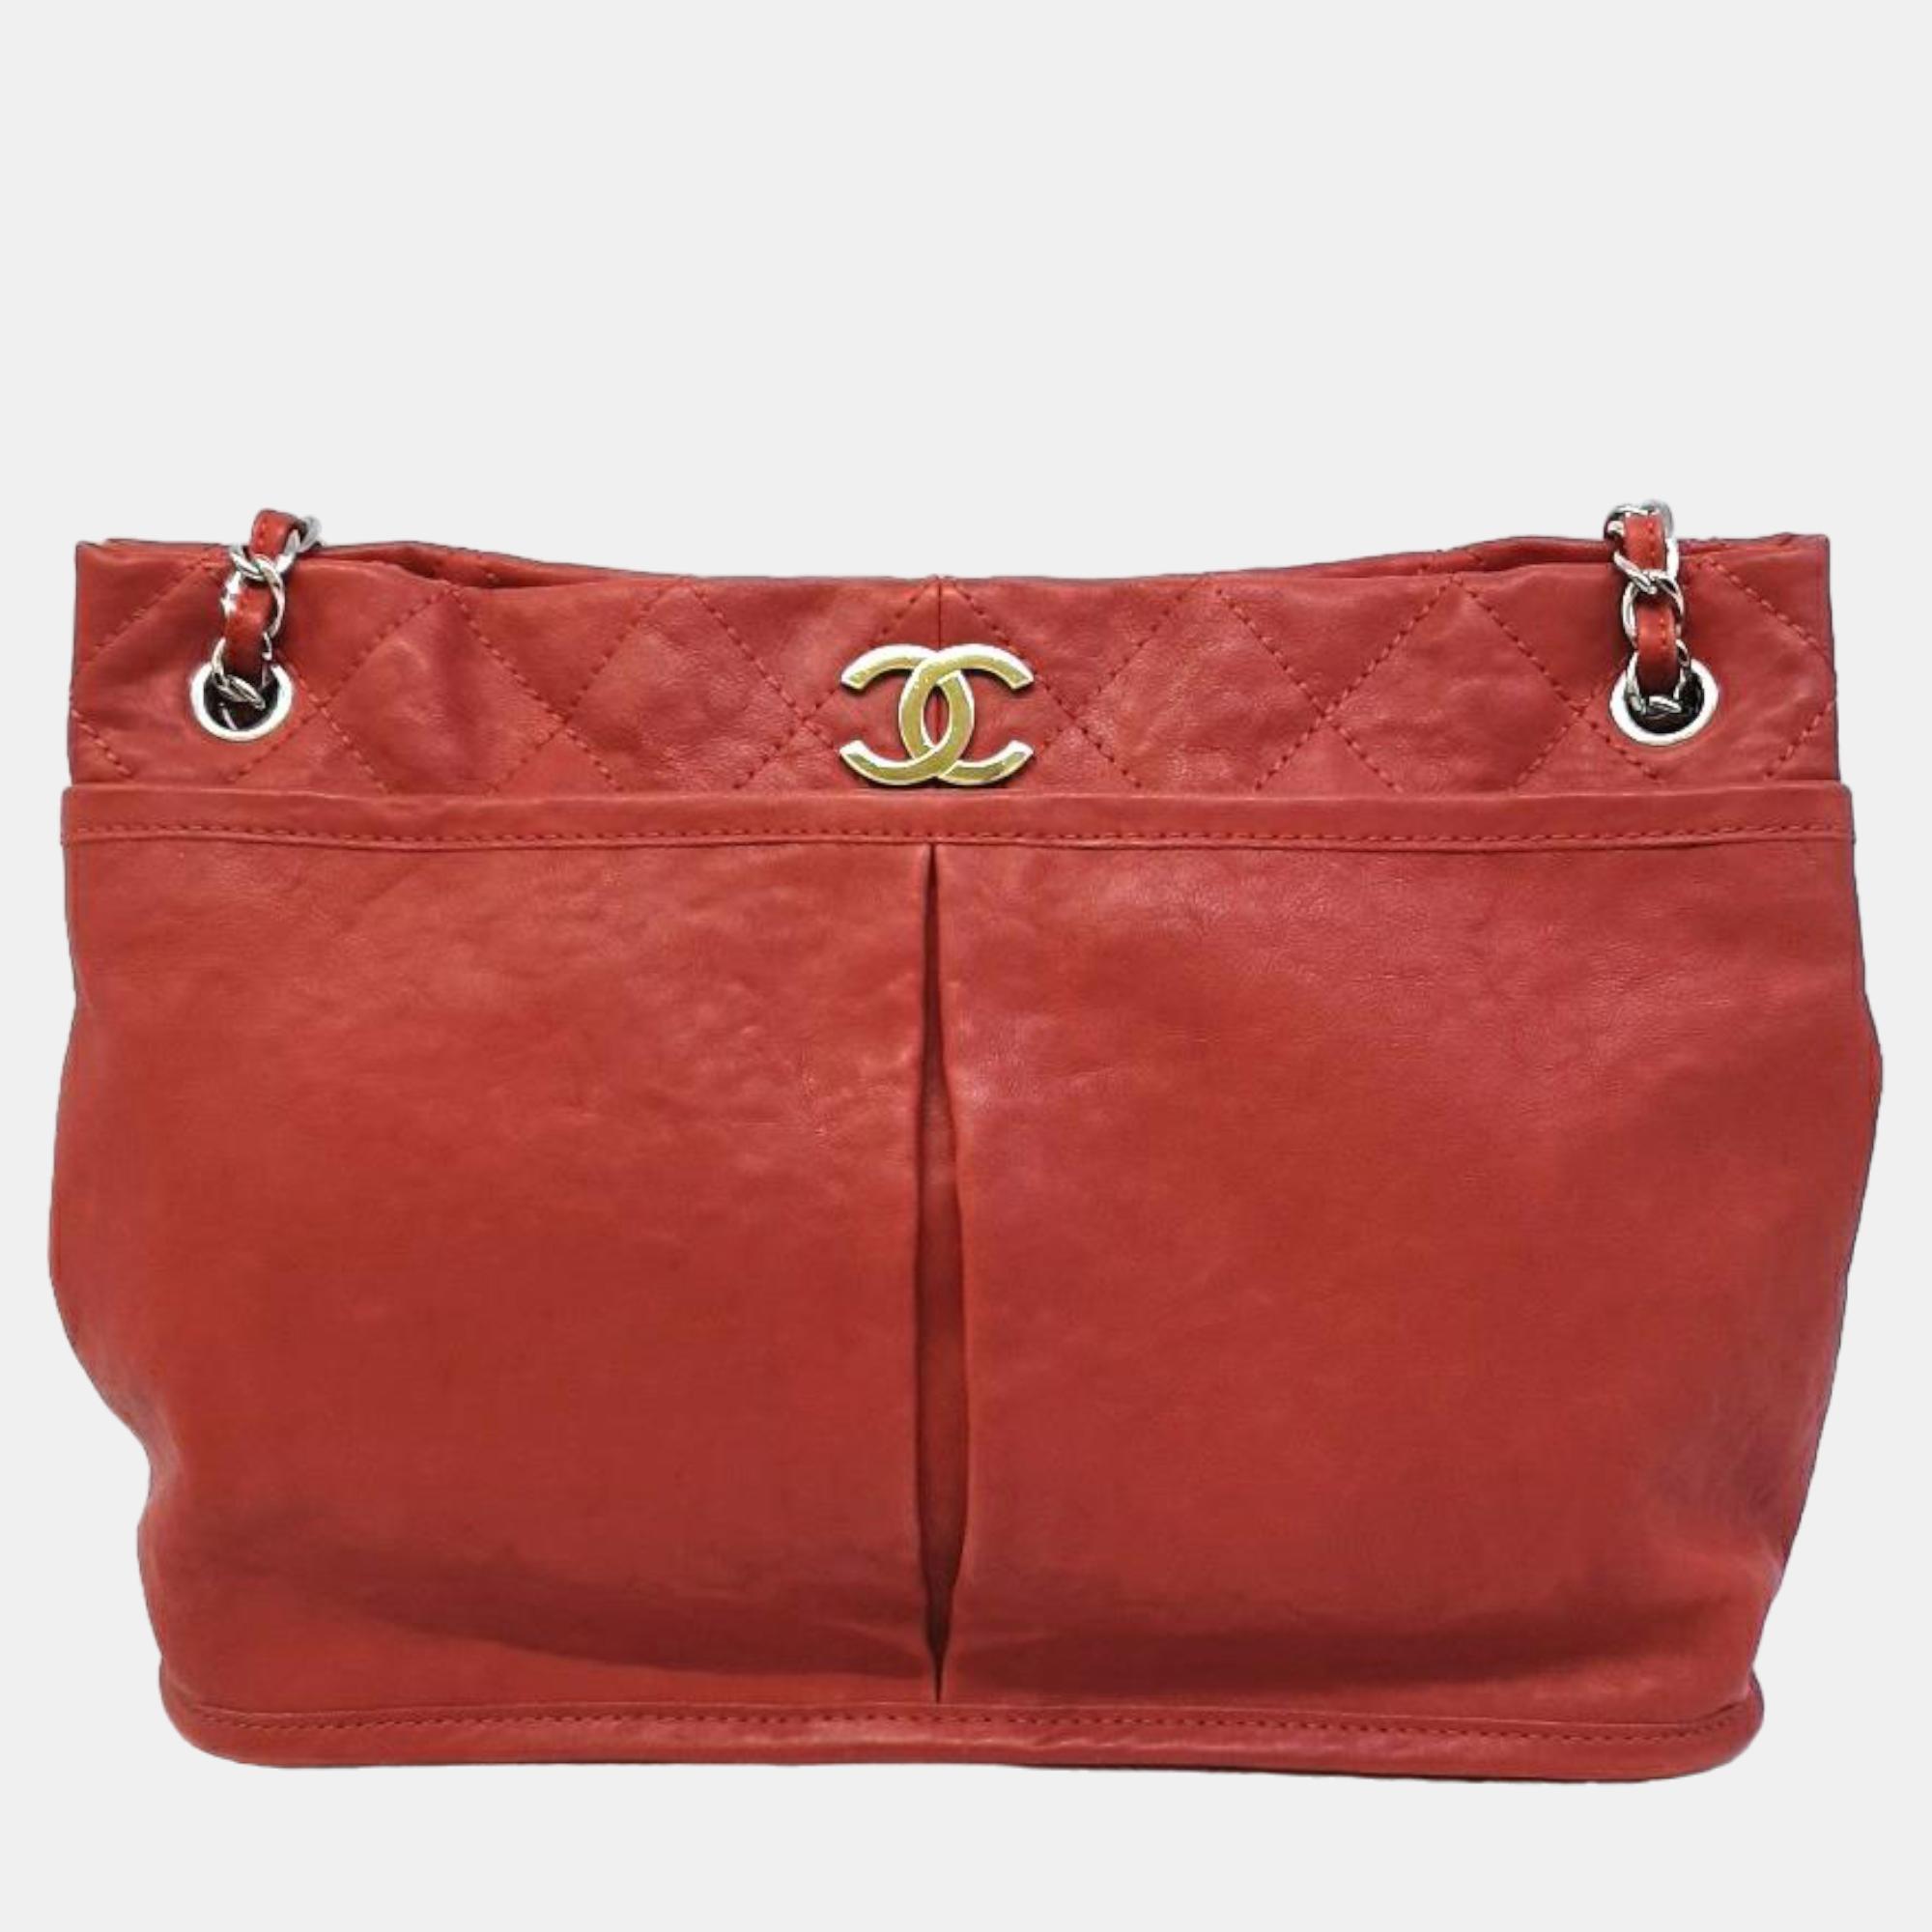 Chanel red leather natural beauty tote bag